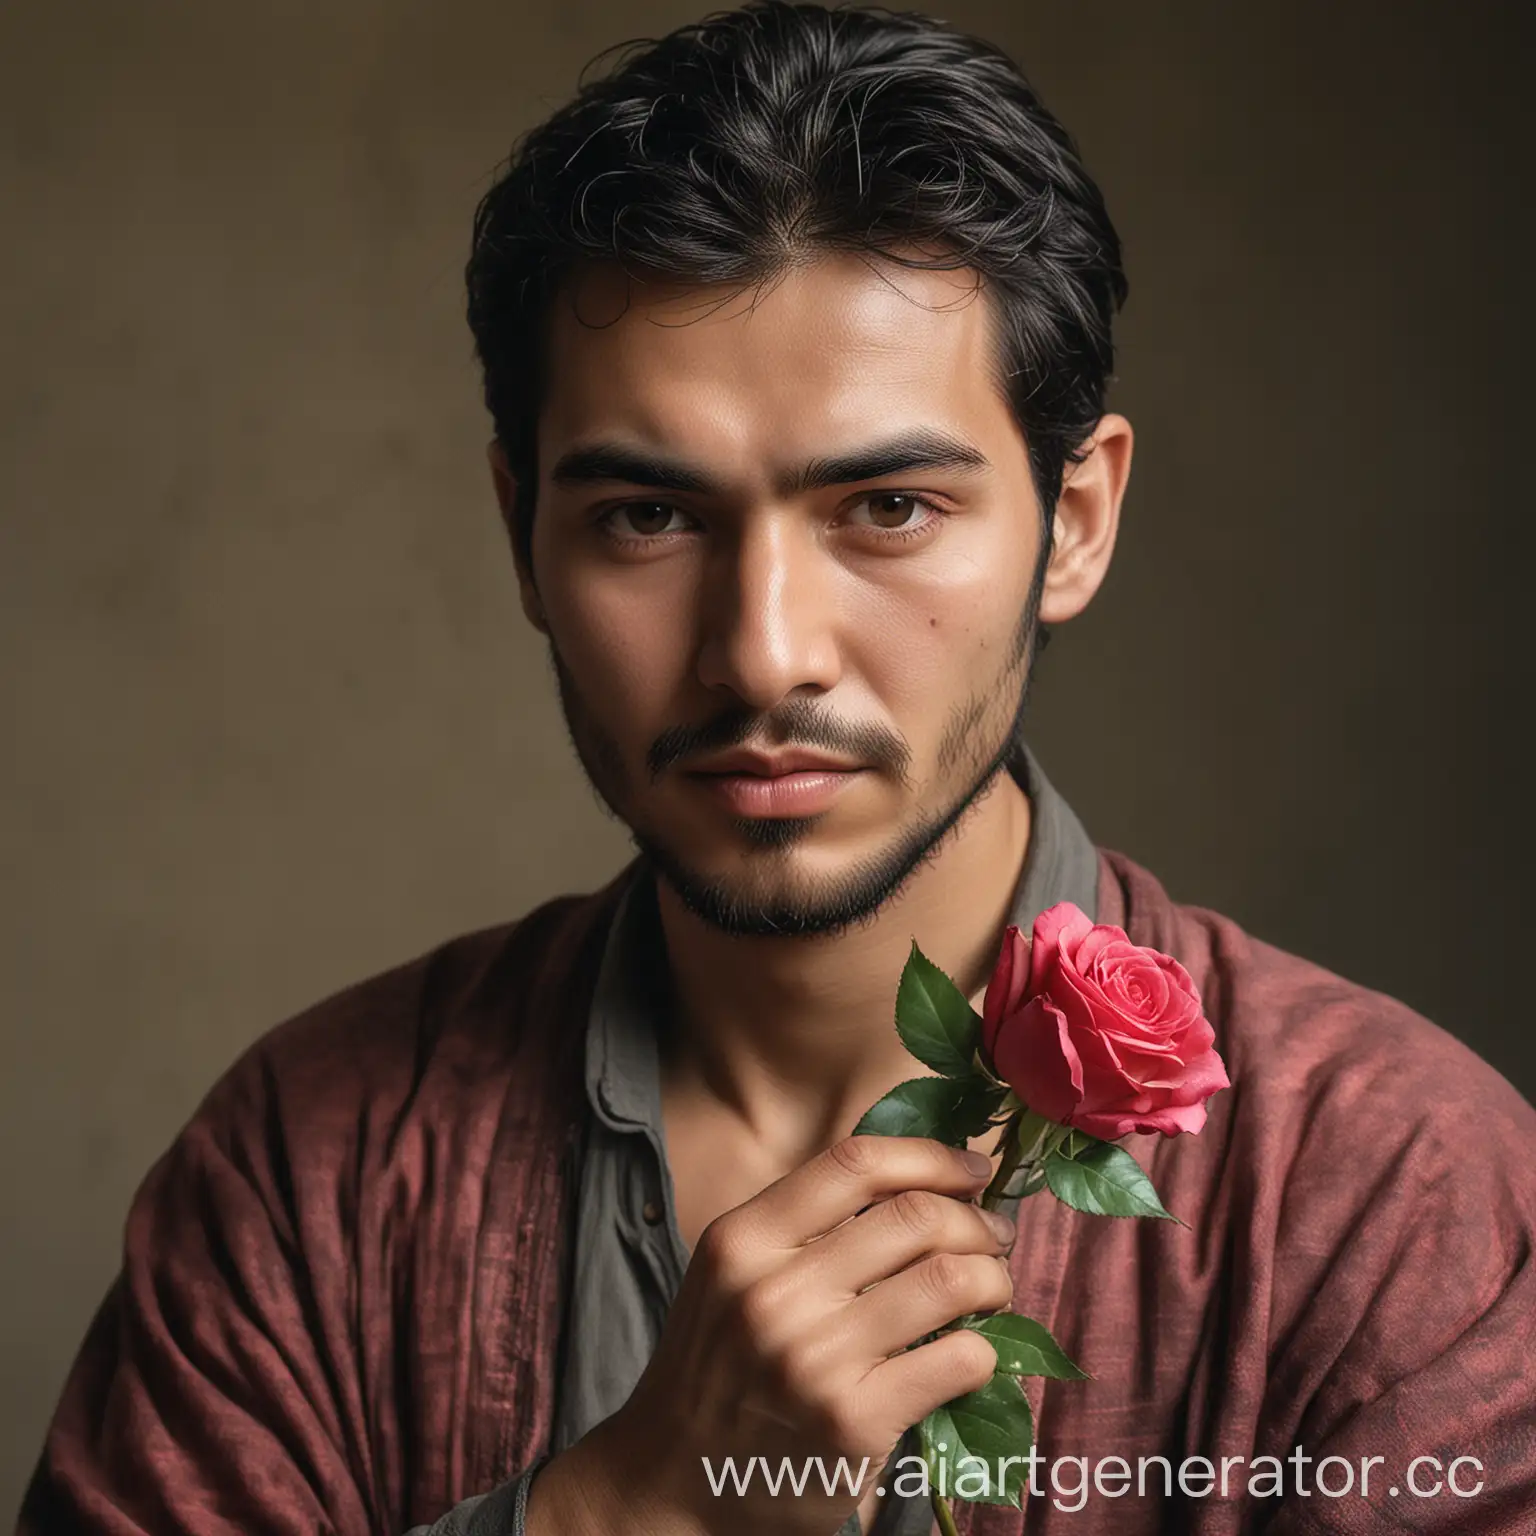 A man of eastern appearance holds a rose